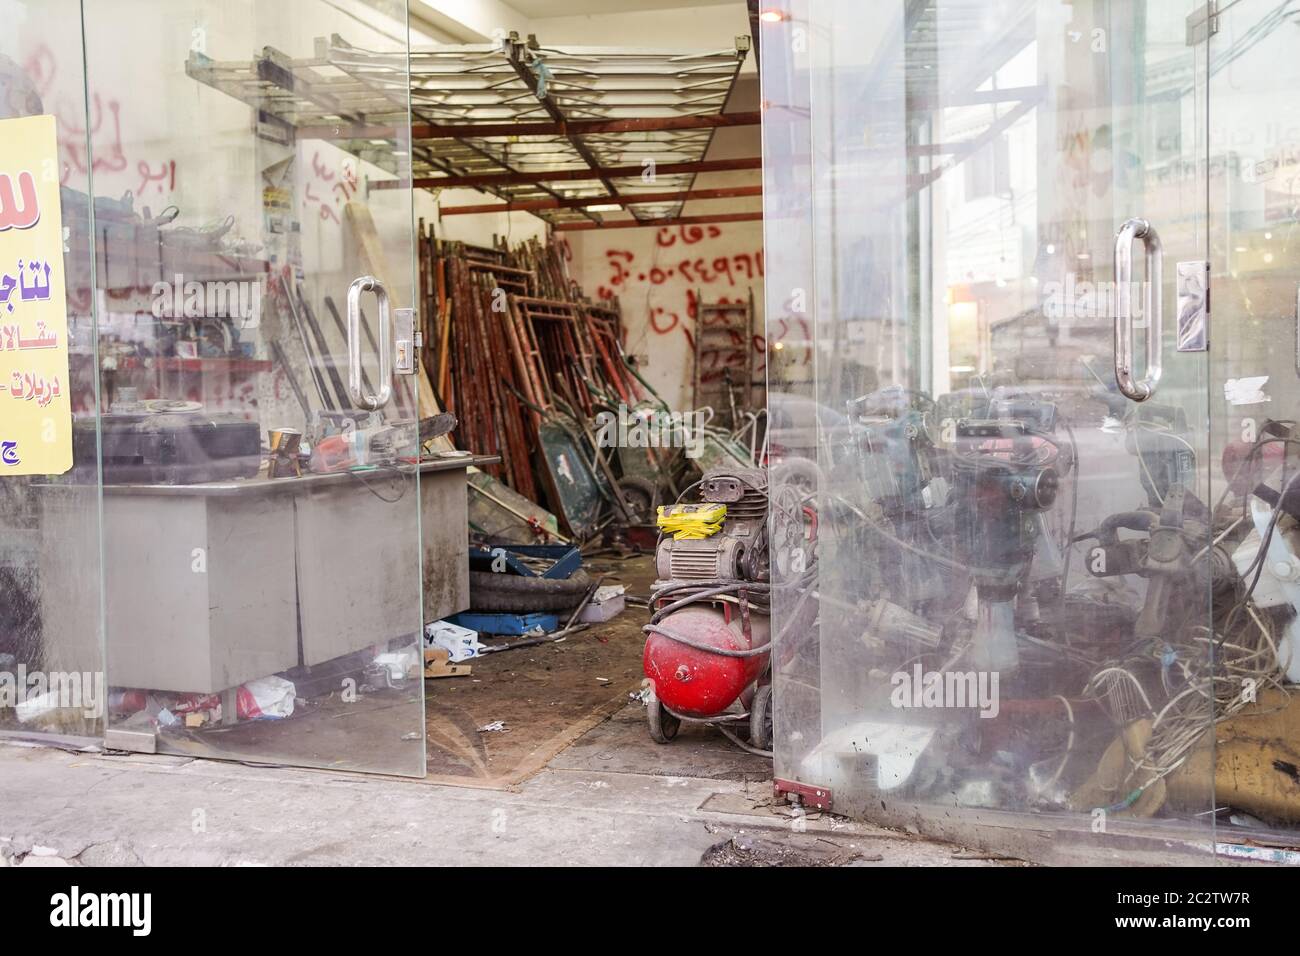 Abha / Saudi Arabia - January 23, 2020: old tousled and broken shop with machines to repair Stock Photo